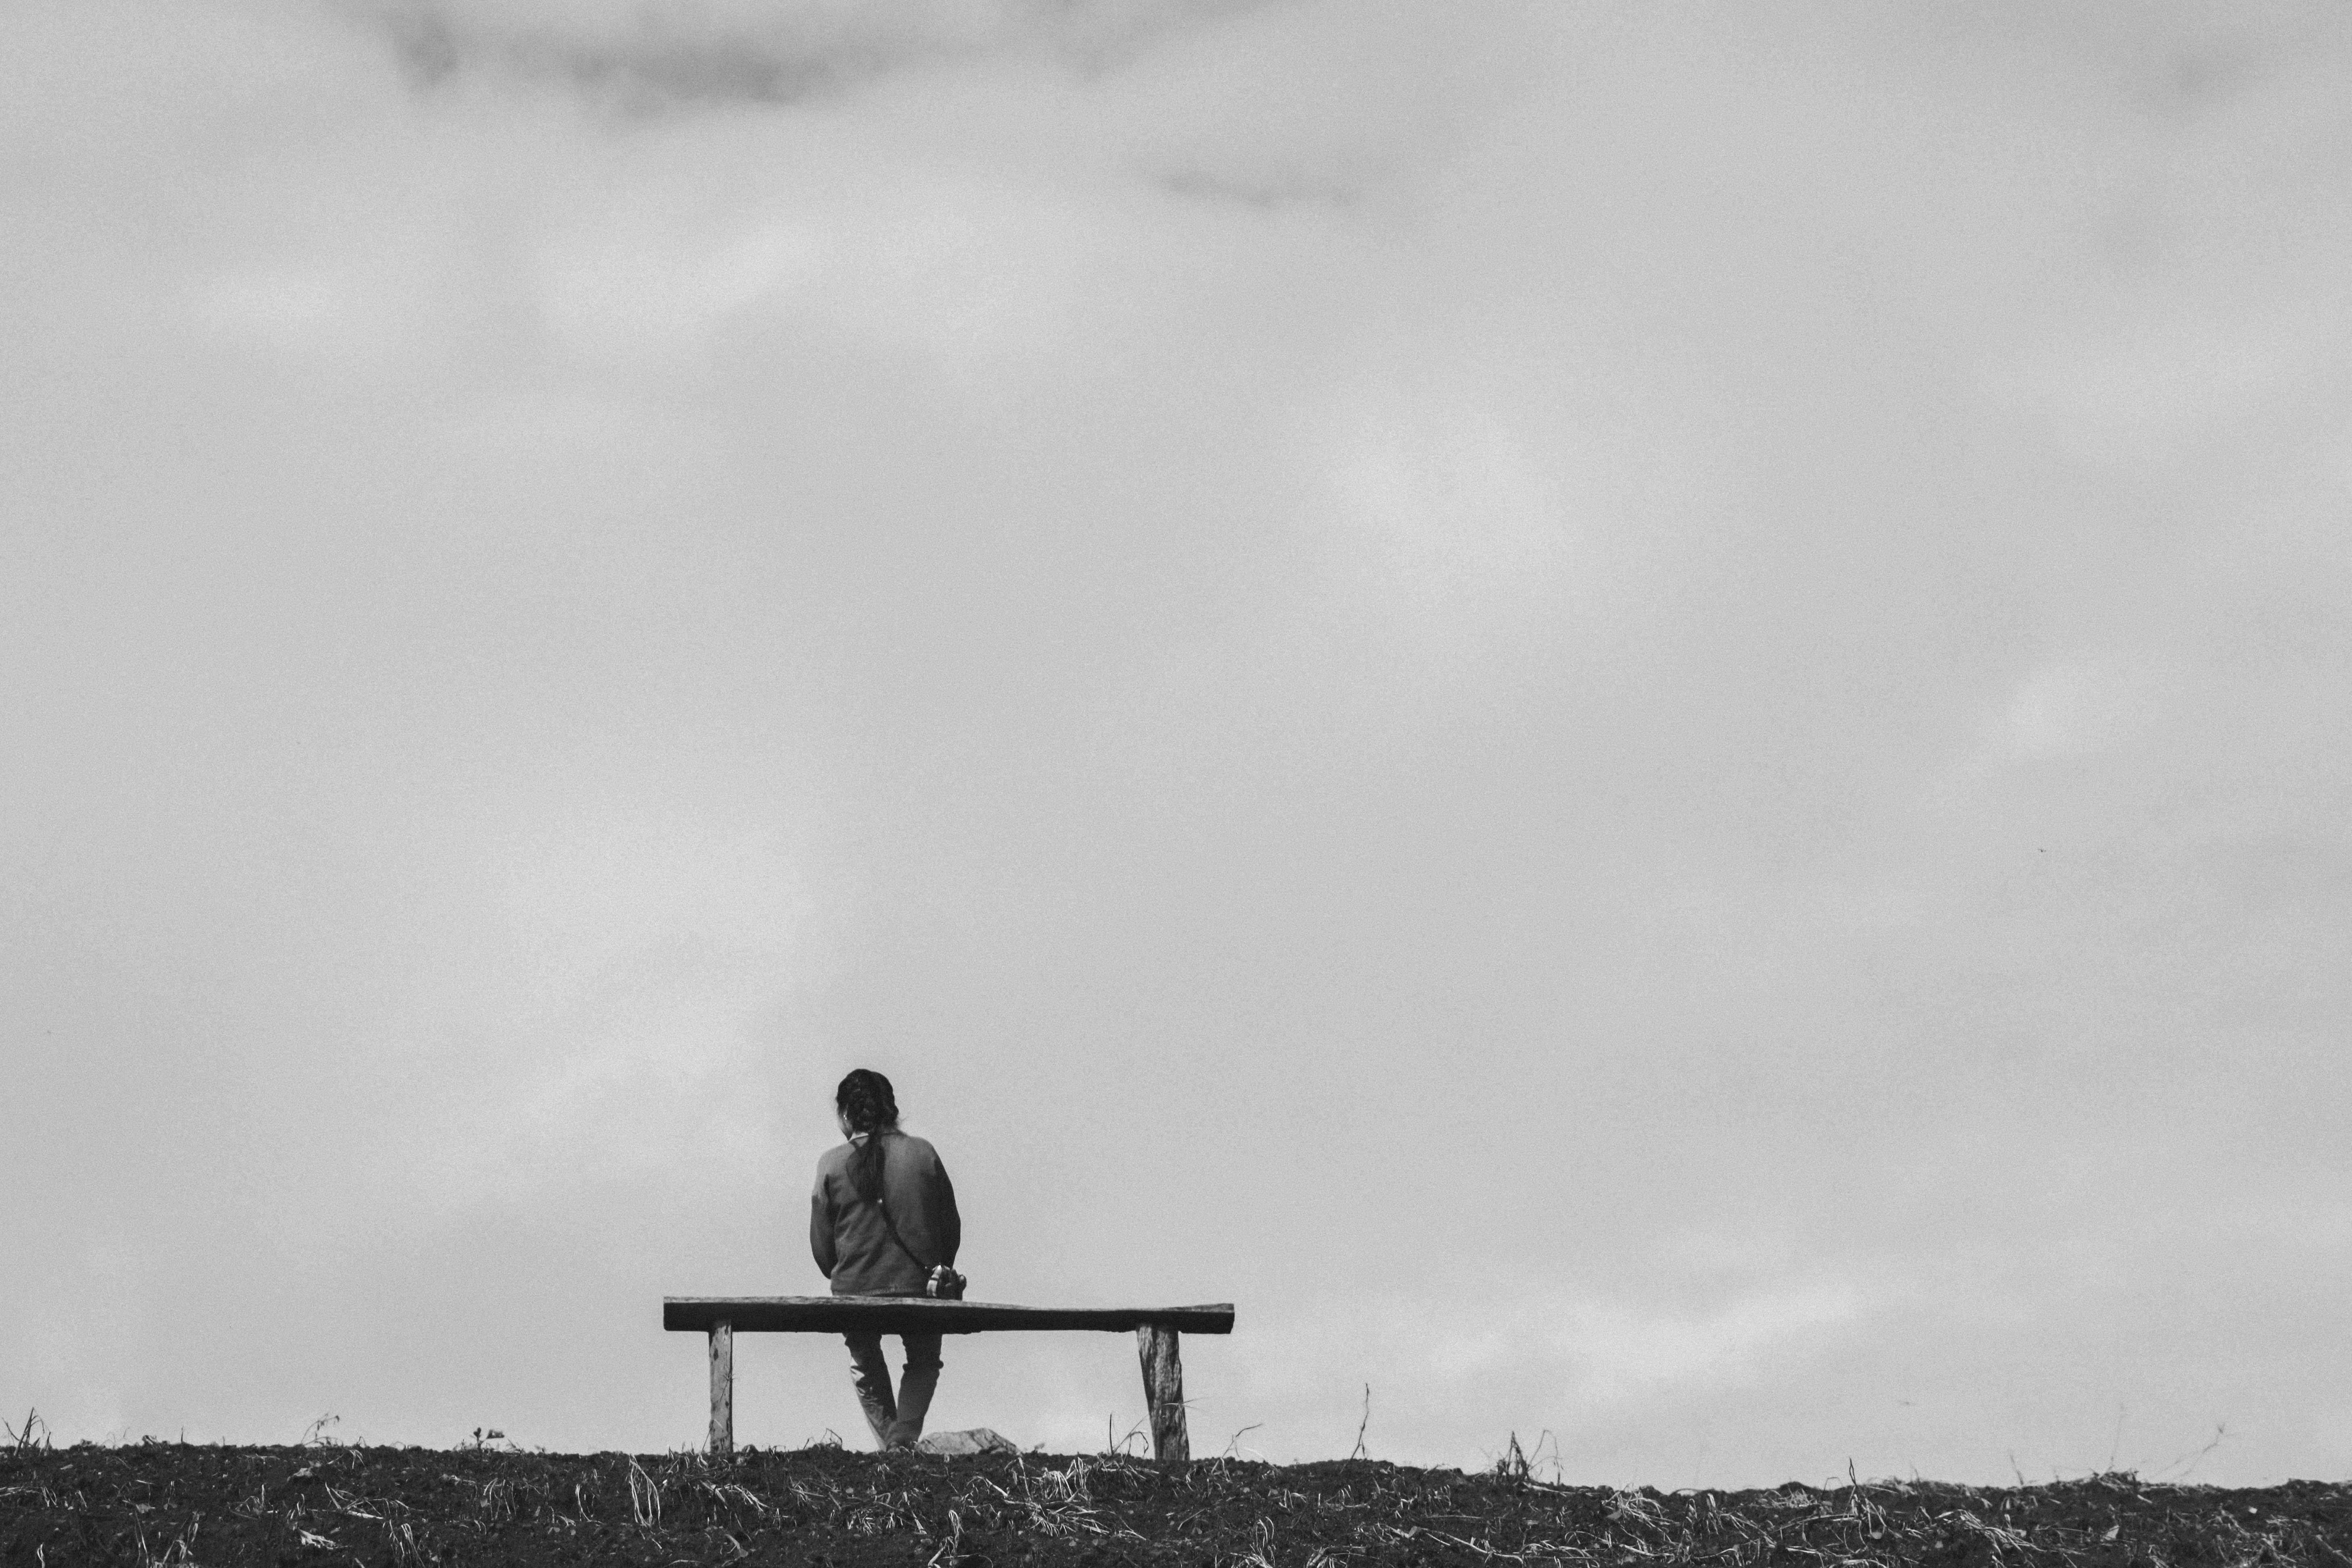 miscellanea, miscellaneous, bw, chb, human, person, loneliness, bench